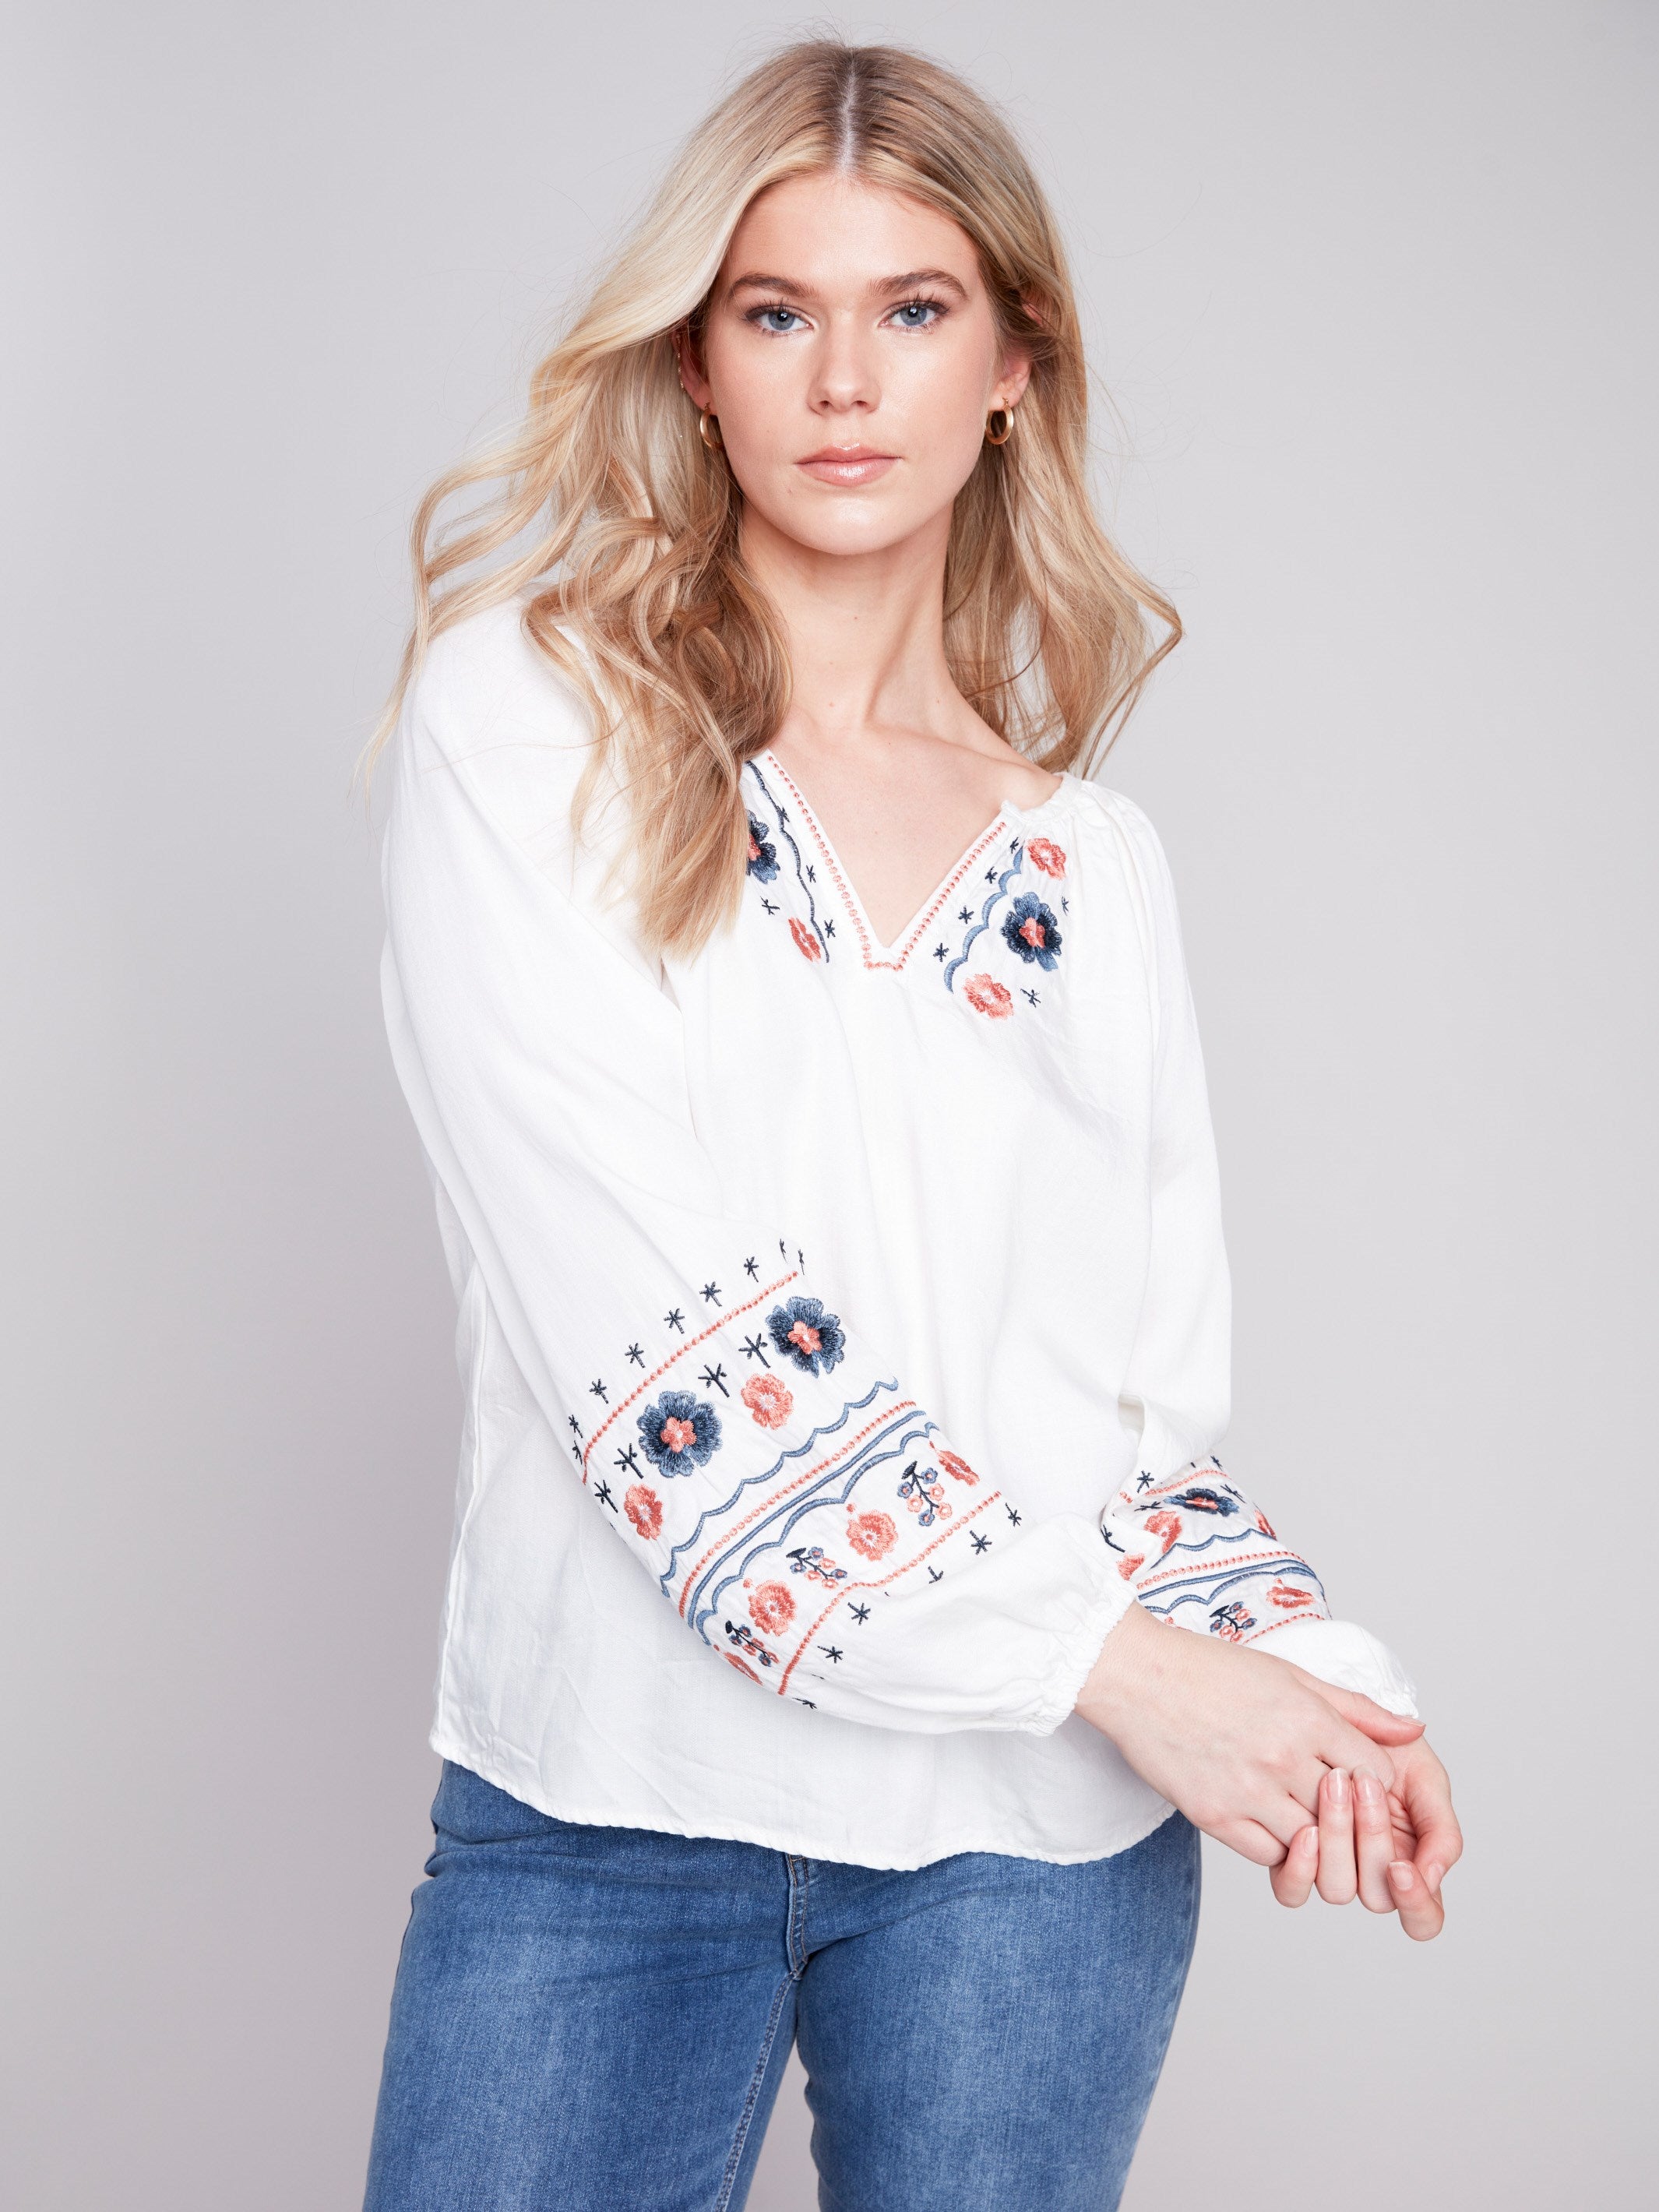 Embroidered Tencel Blouse - White - Charlie B Collection Canada - Image 1